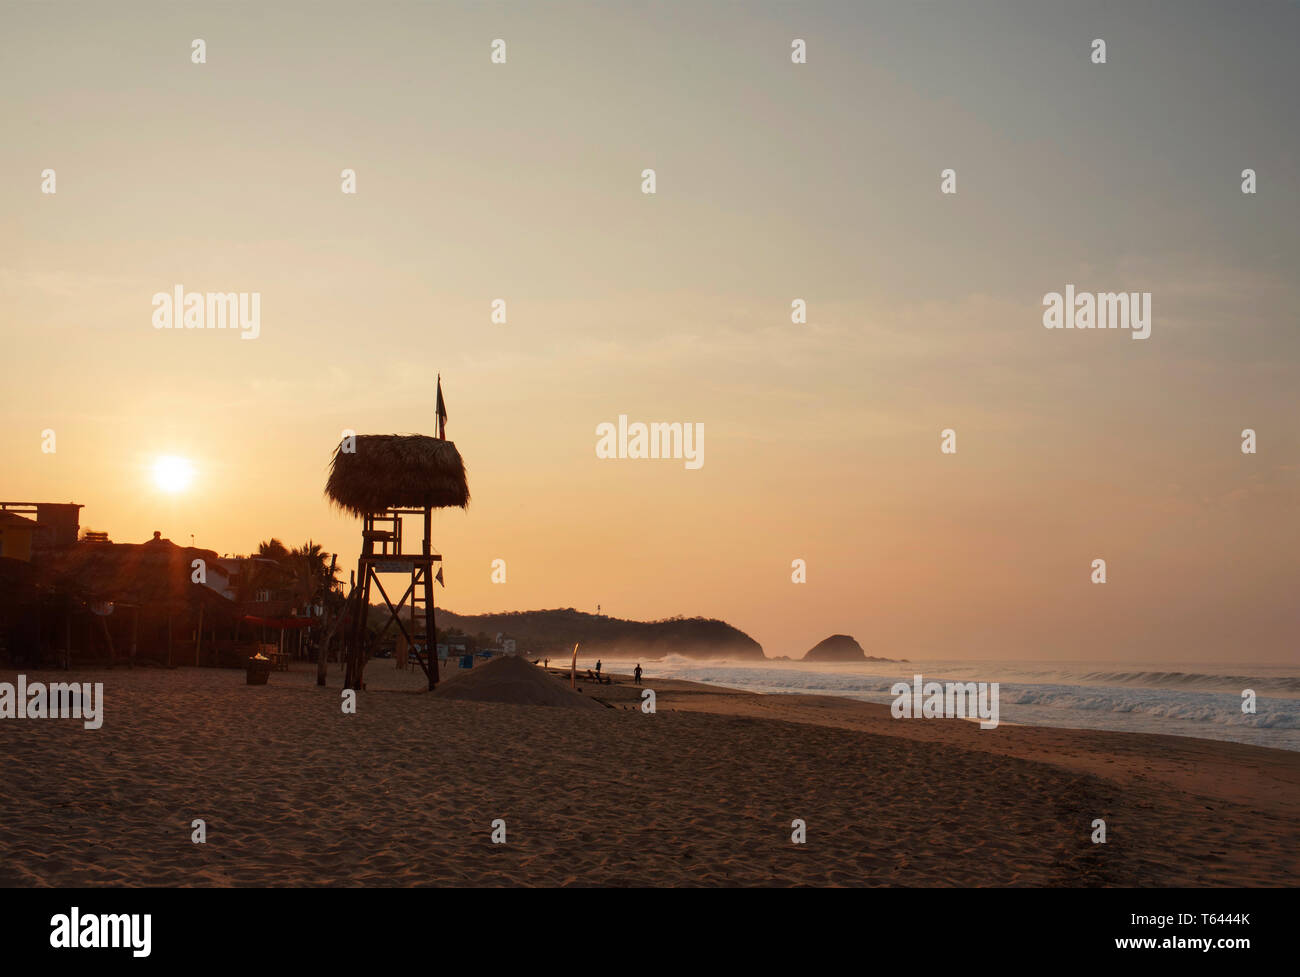 Lifeguard tower and scenic beach during sunrise. Zipolite, Oaxaca State, Mexico. Apr 2019 Stock Photo